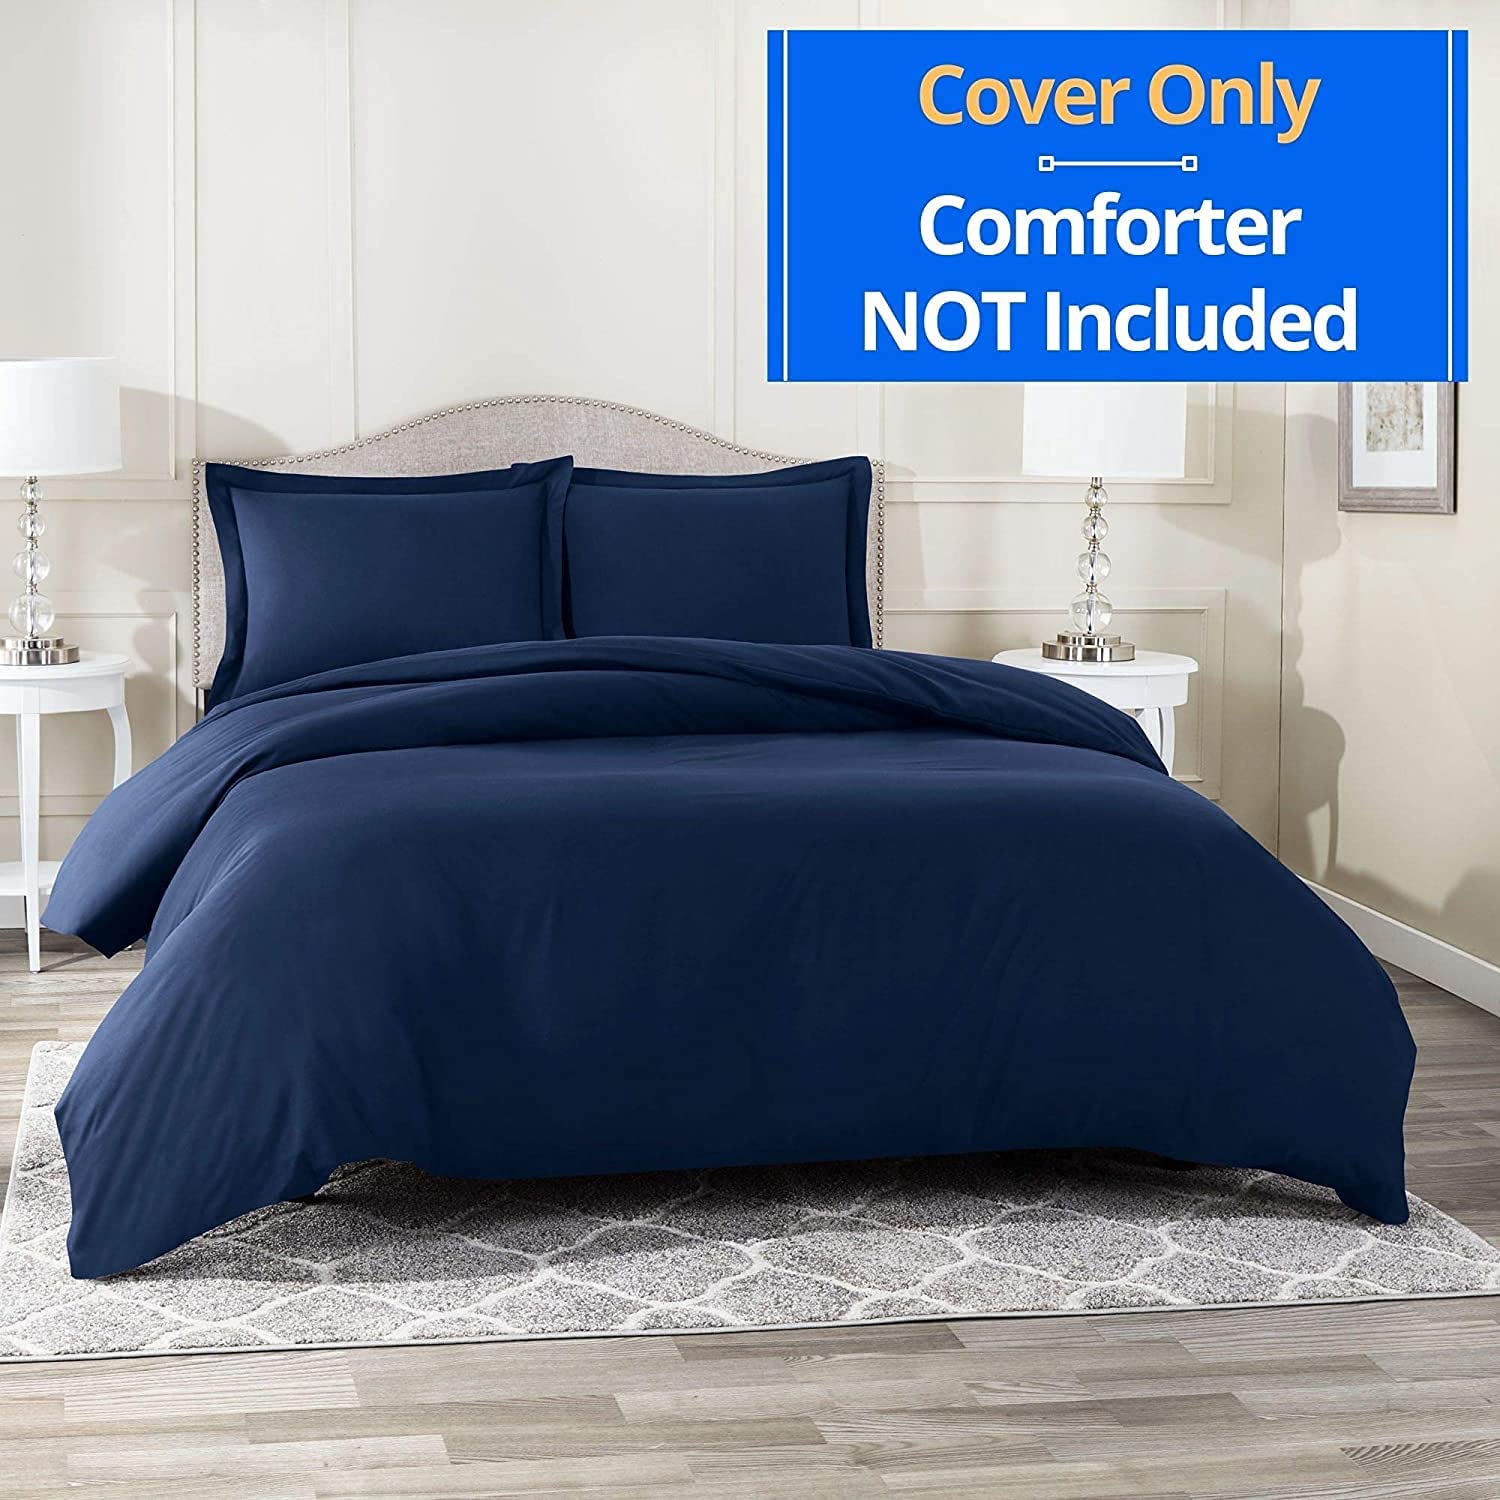 100% Pure Egyptian Cotton Queen Navy Duvet Cover Set 400 Thread Count- 3 Piece- Sateen Weave- Long Staple Combed Cotton-Extra Soft Smooth Silky- Sateen Weave (Queen,Navy)